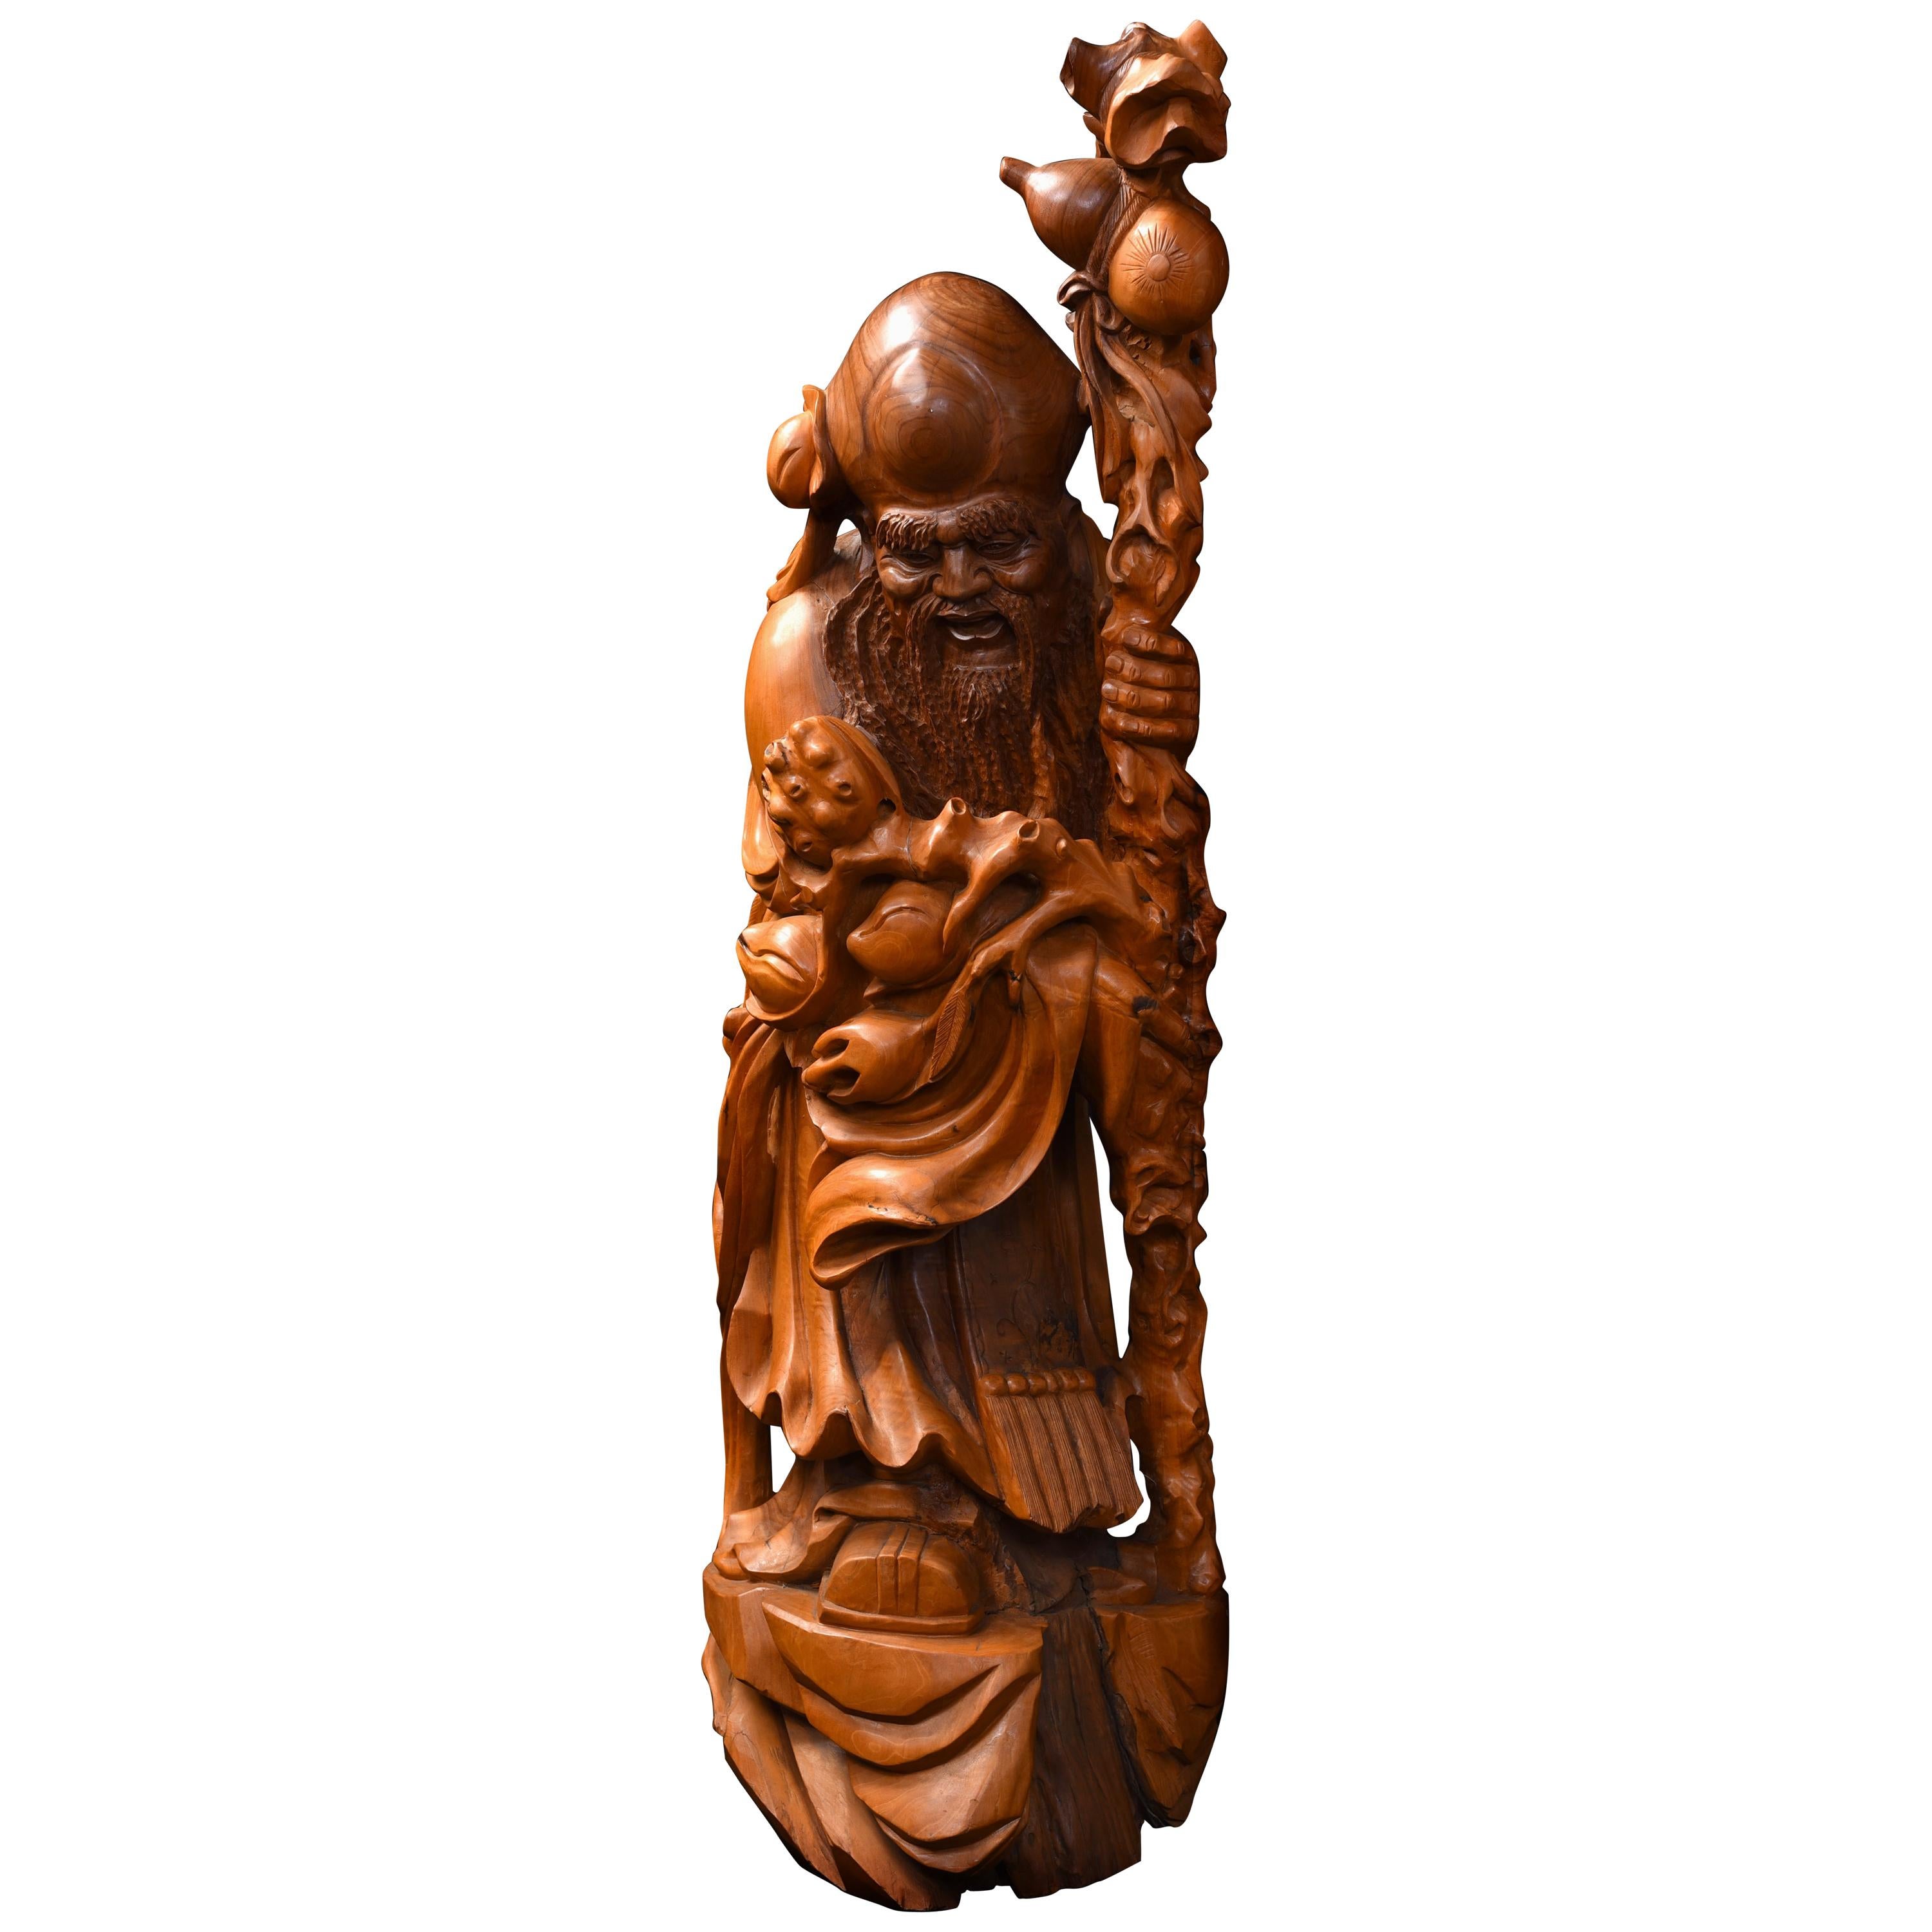 Large Chinese Carved Sculpture of Shou Xing God of Wisdom and Longevity